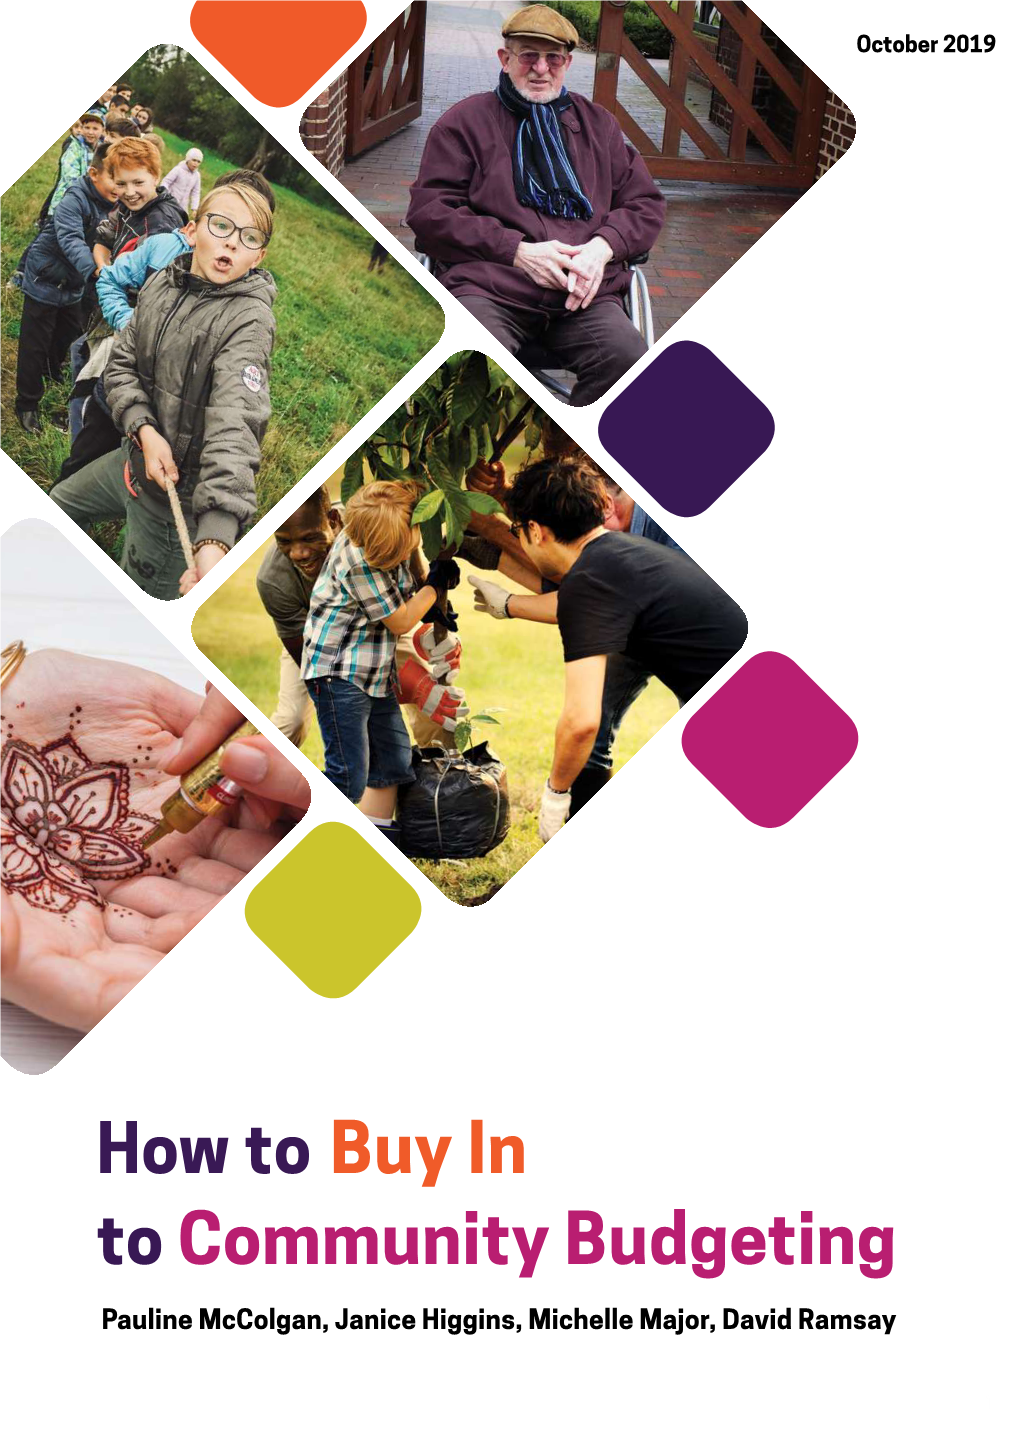 TOOLKIT: How to Buy in to Community Budgeting